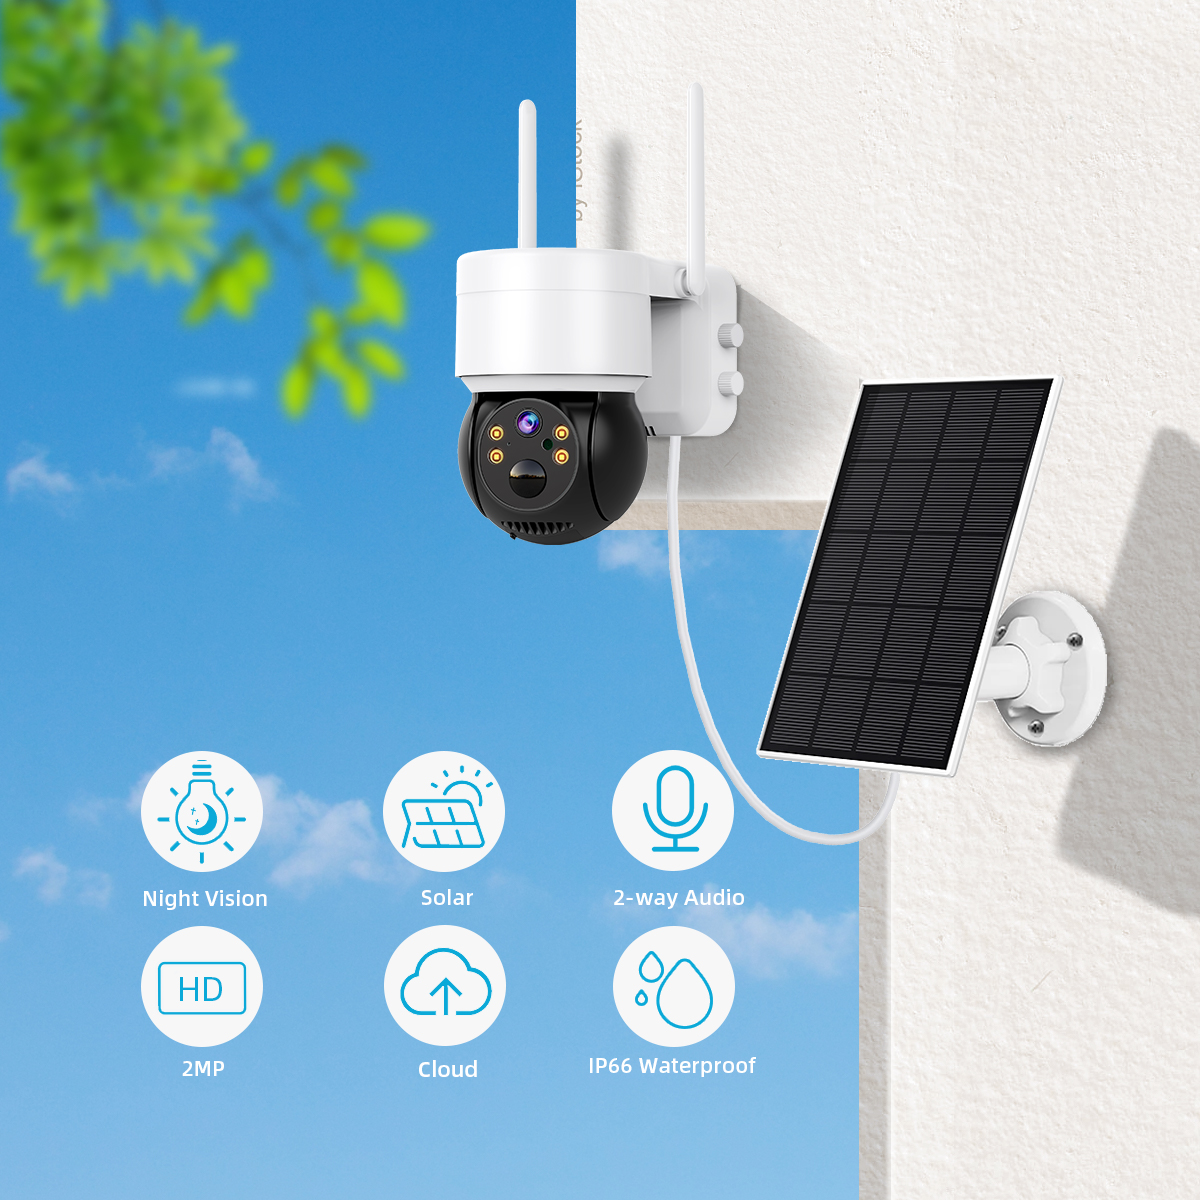 Q6 5W Solar-Powered Wireless Camera 2MP HD Low Power Consumption PIR Human Detection Night Vision 2-way Audio IP66 Waterproof Home Security Cameras